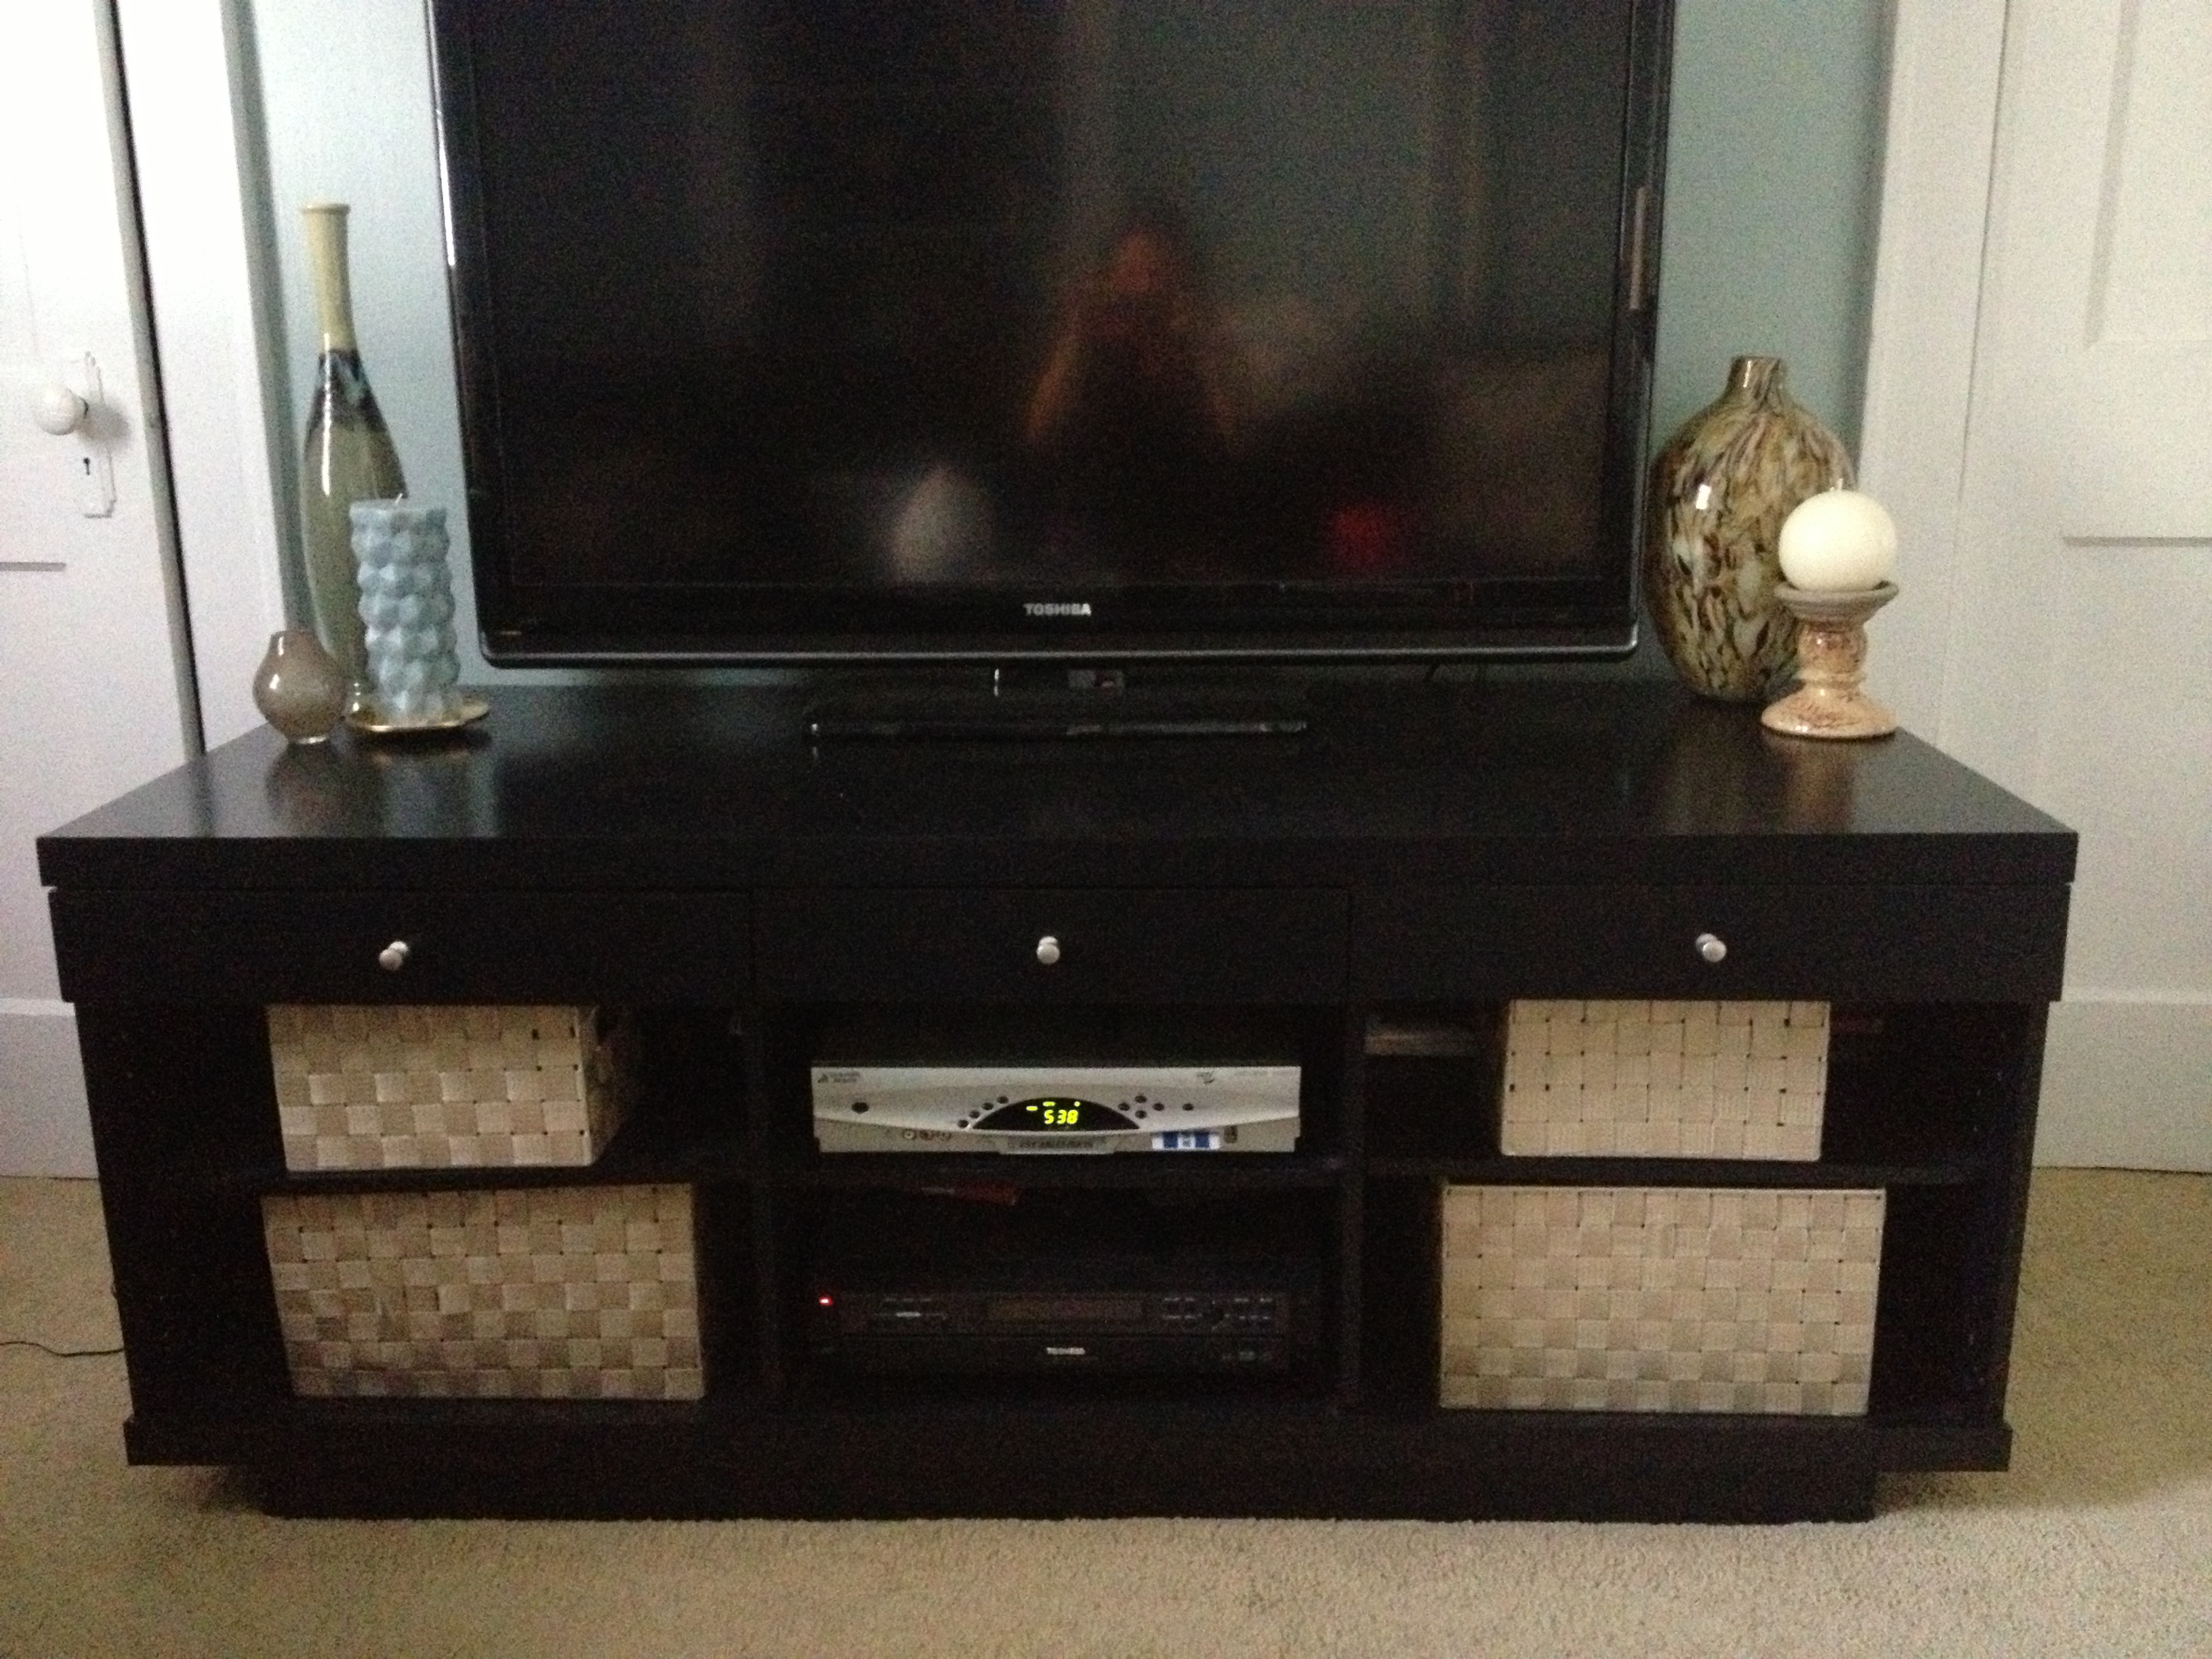 Tall TV stand - small budget hack for big TV - IKEA Hackers